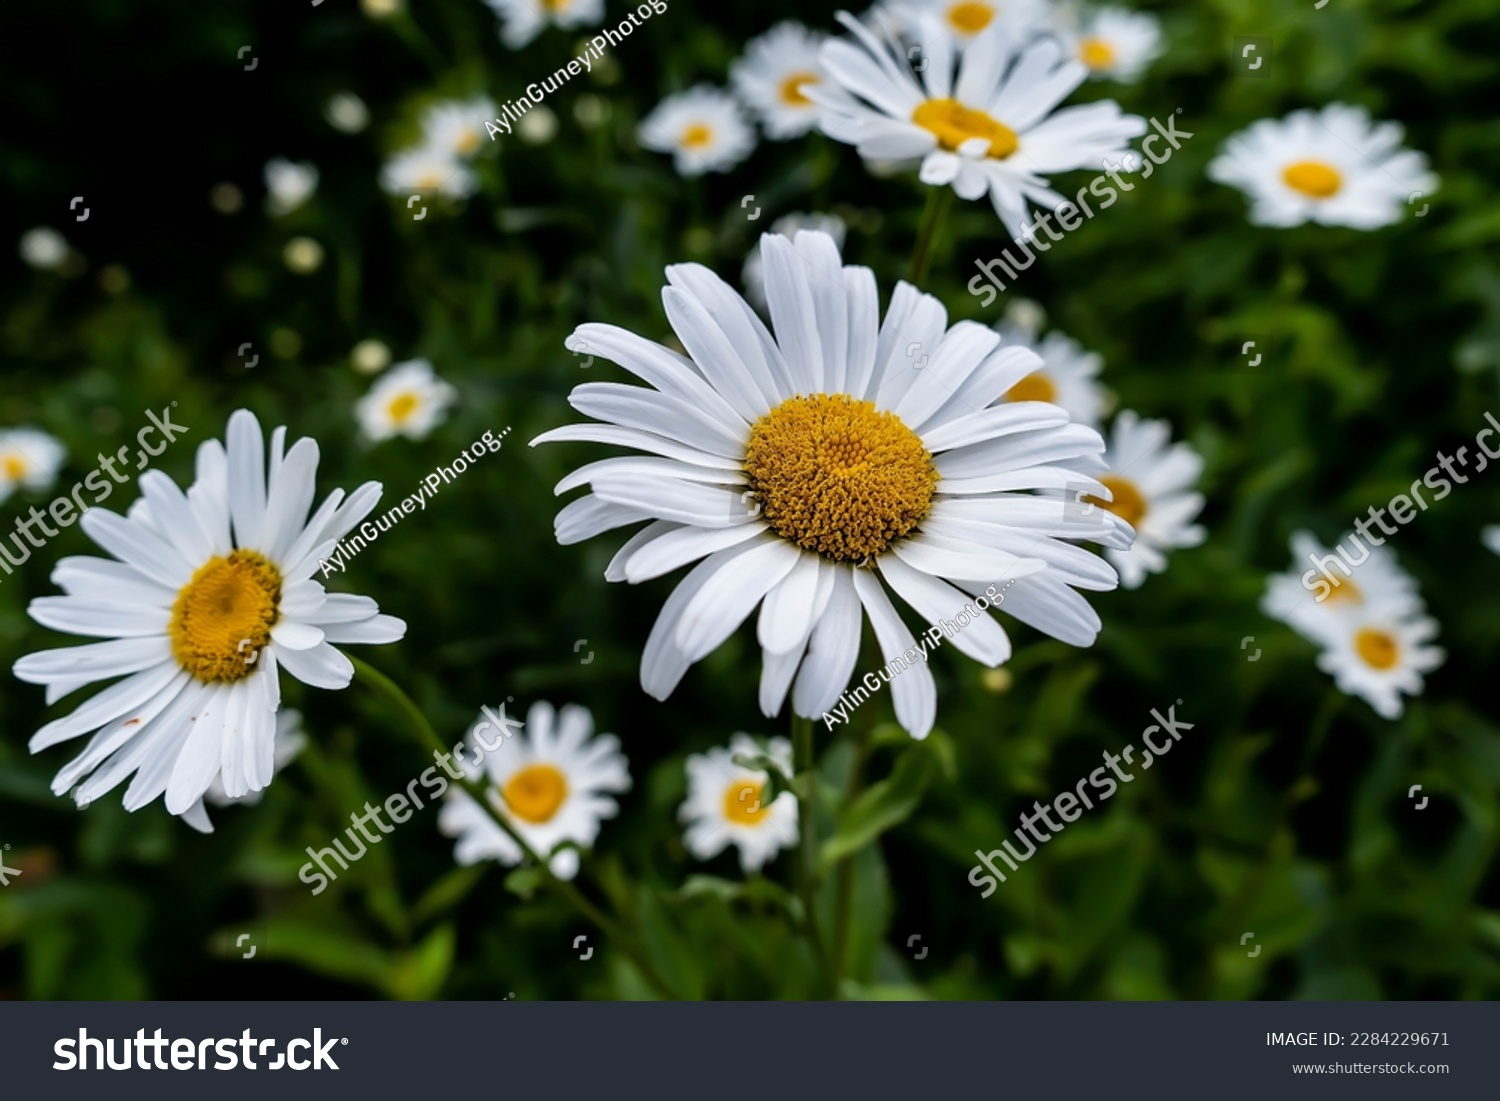 Wild daisy flowers growing on meadow, white chamomiles on green grass background. Oxeye daisy, Leucanthemum vulgare, Daisies, Dox-eye, Common daisy, Dog daisy, Gardening concept. #2284229671